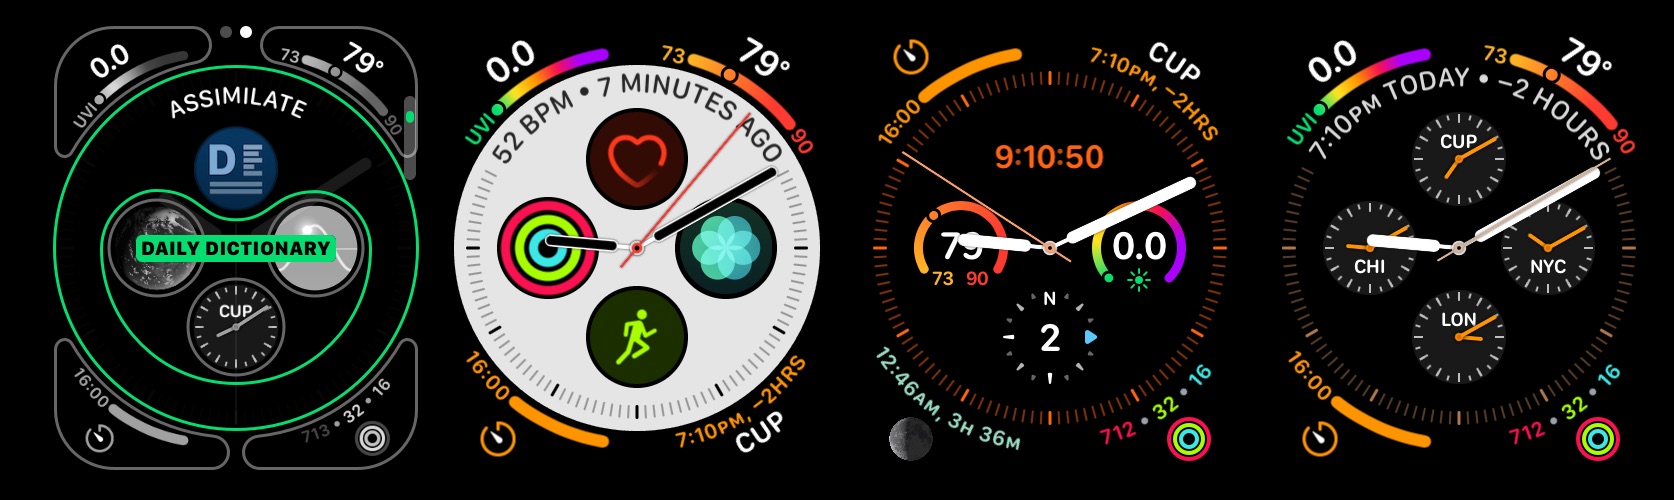 watchOS 6 features: New apps, watch faces, and more - 9to5Mac